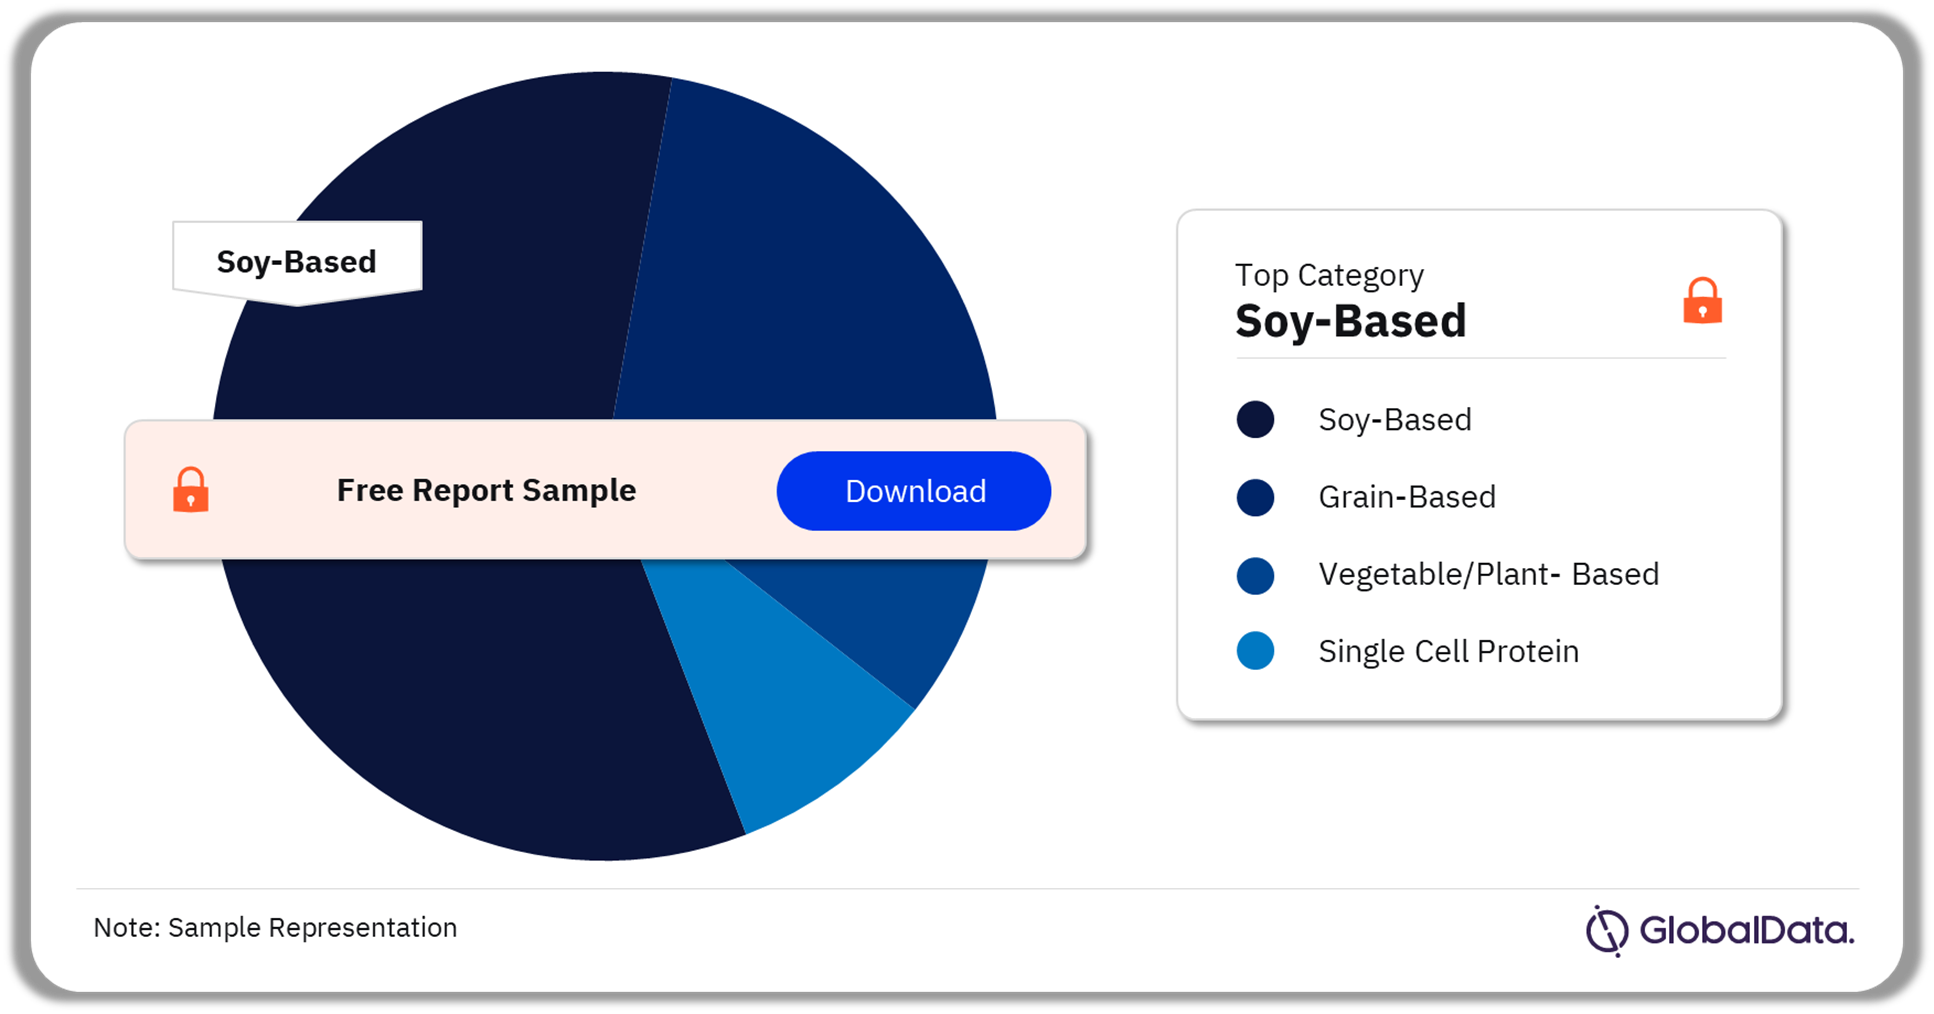 Meat Substitutes Market Analysis by Category, 2022 (%)